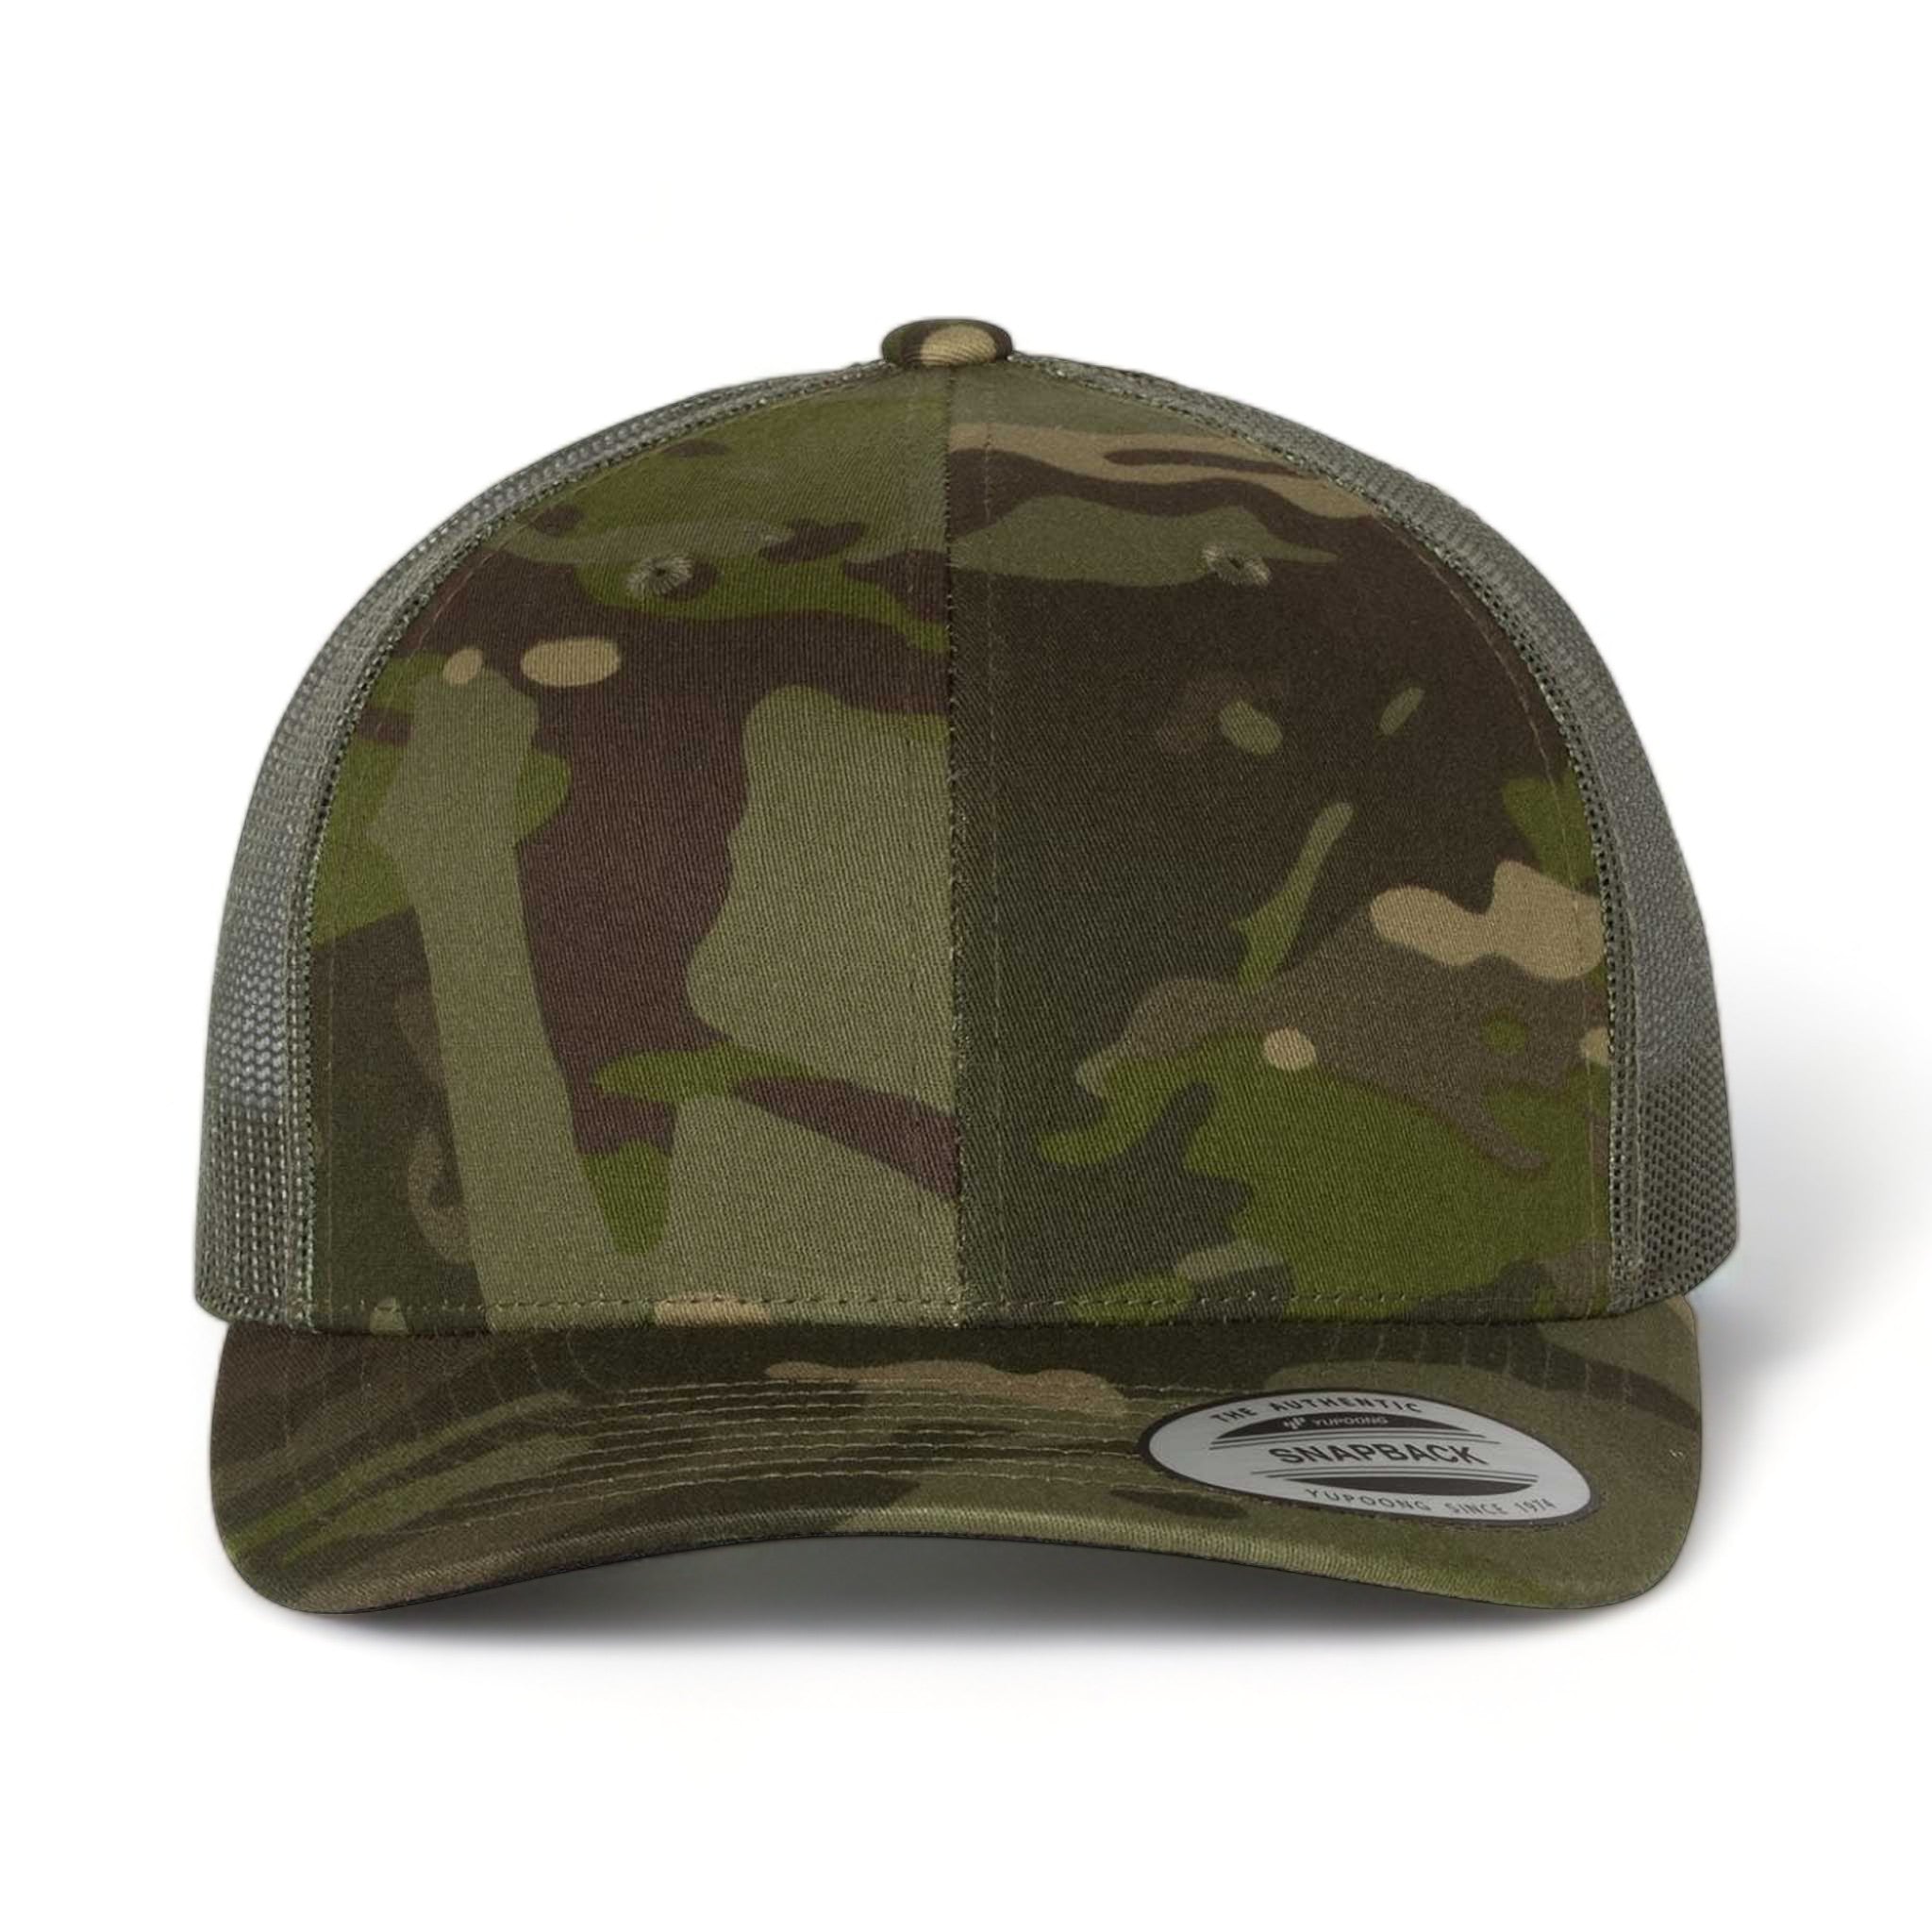 Front view of YP Classics 6606 custom hat in multicam tropic and green